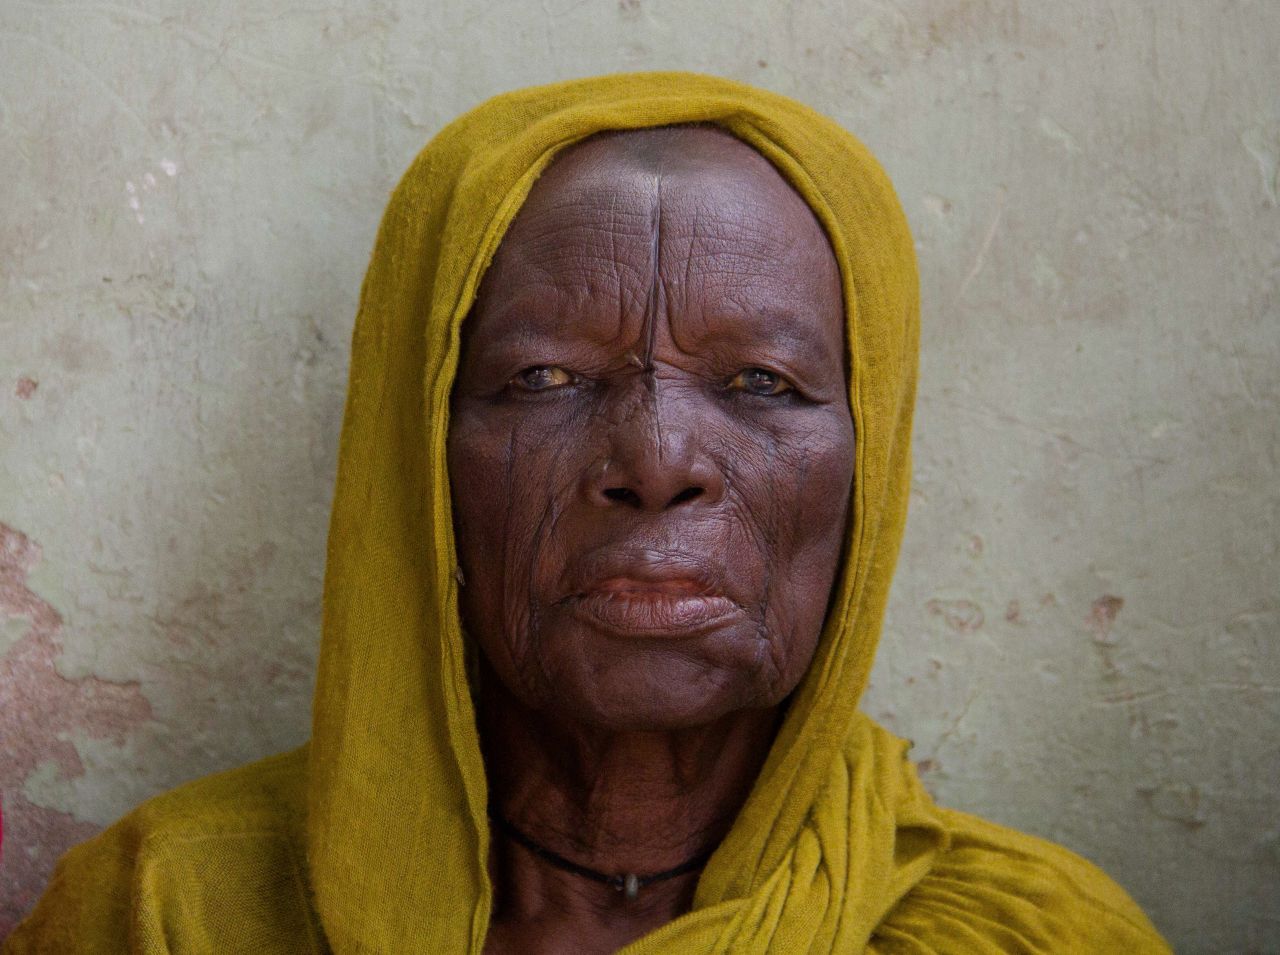 "She was so quiet it was disturbing," Abubakar recalls on meeting this anonymous subject. "I wonder what scars she came with. The mass relocation to Maiduguri during Boko Haram has brought a lot of the villagers to the town. And one wonders what they had to endure." 